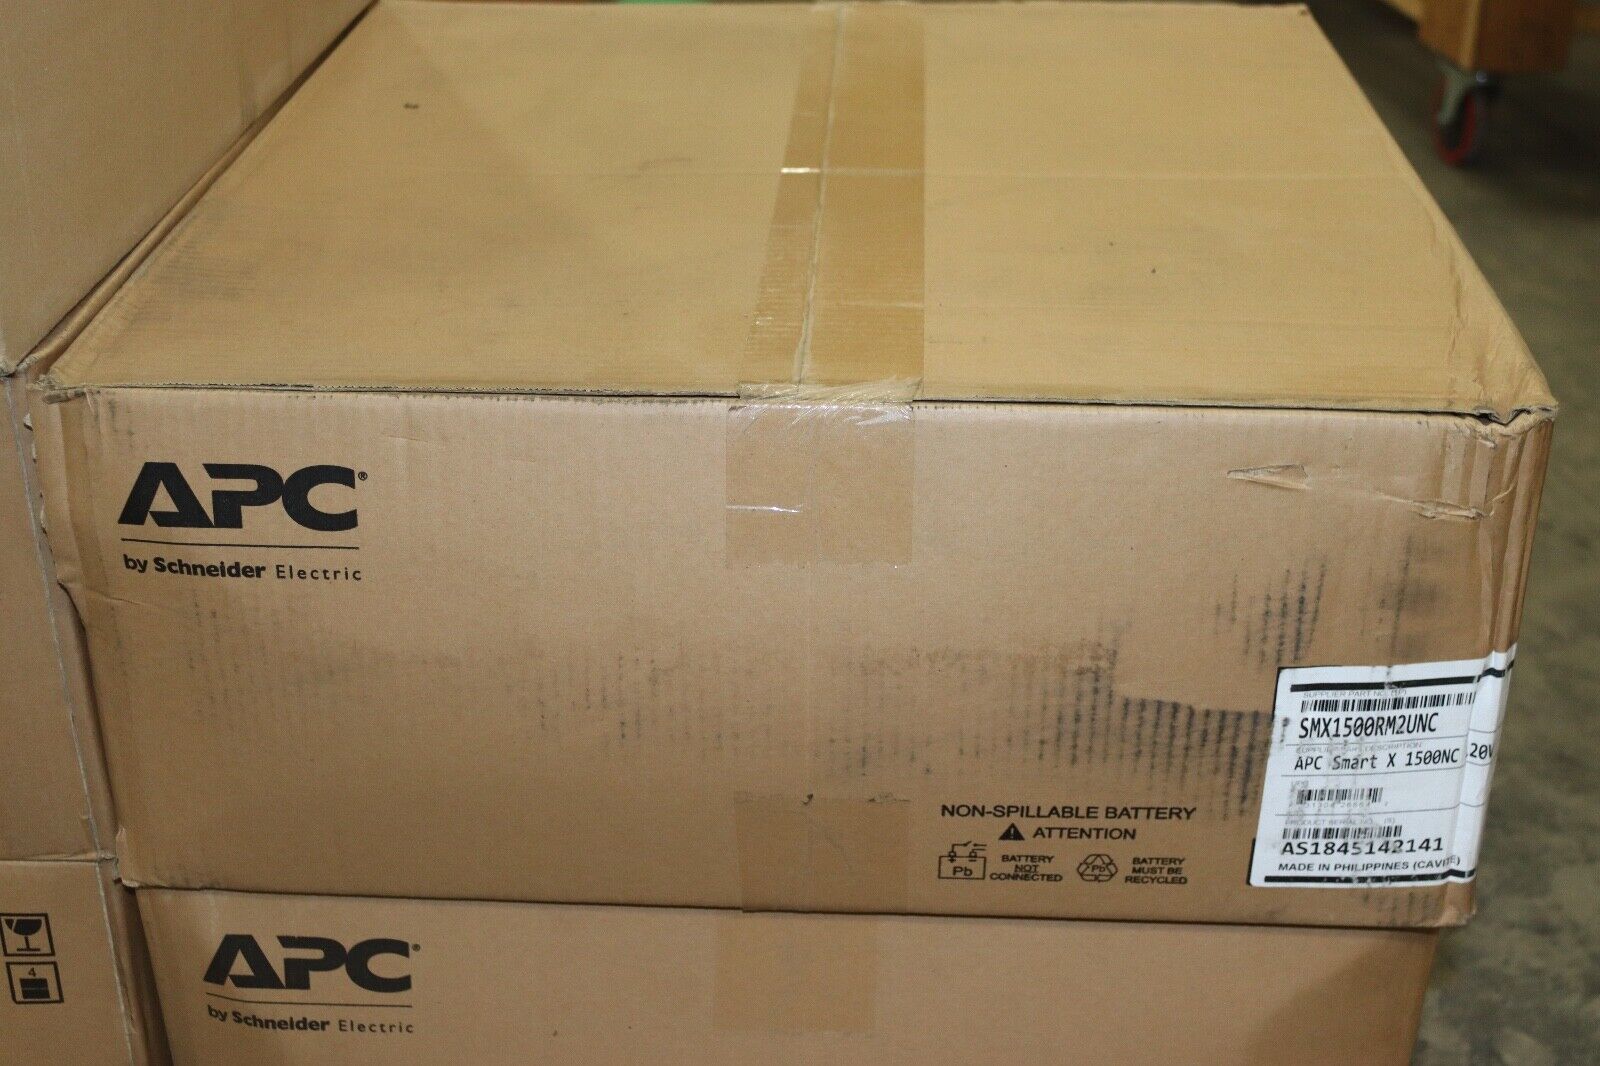 NEW APC Smart-UPS Battery Backup & Surge Protector with SmartConnect SMT750RM2UC